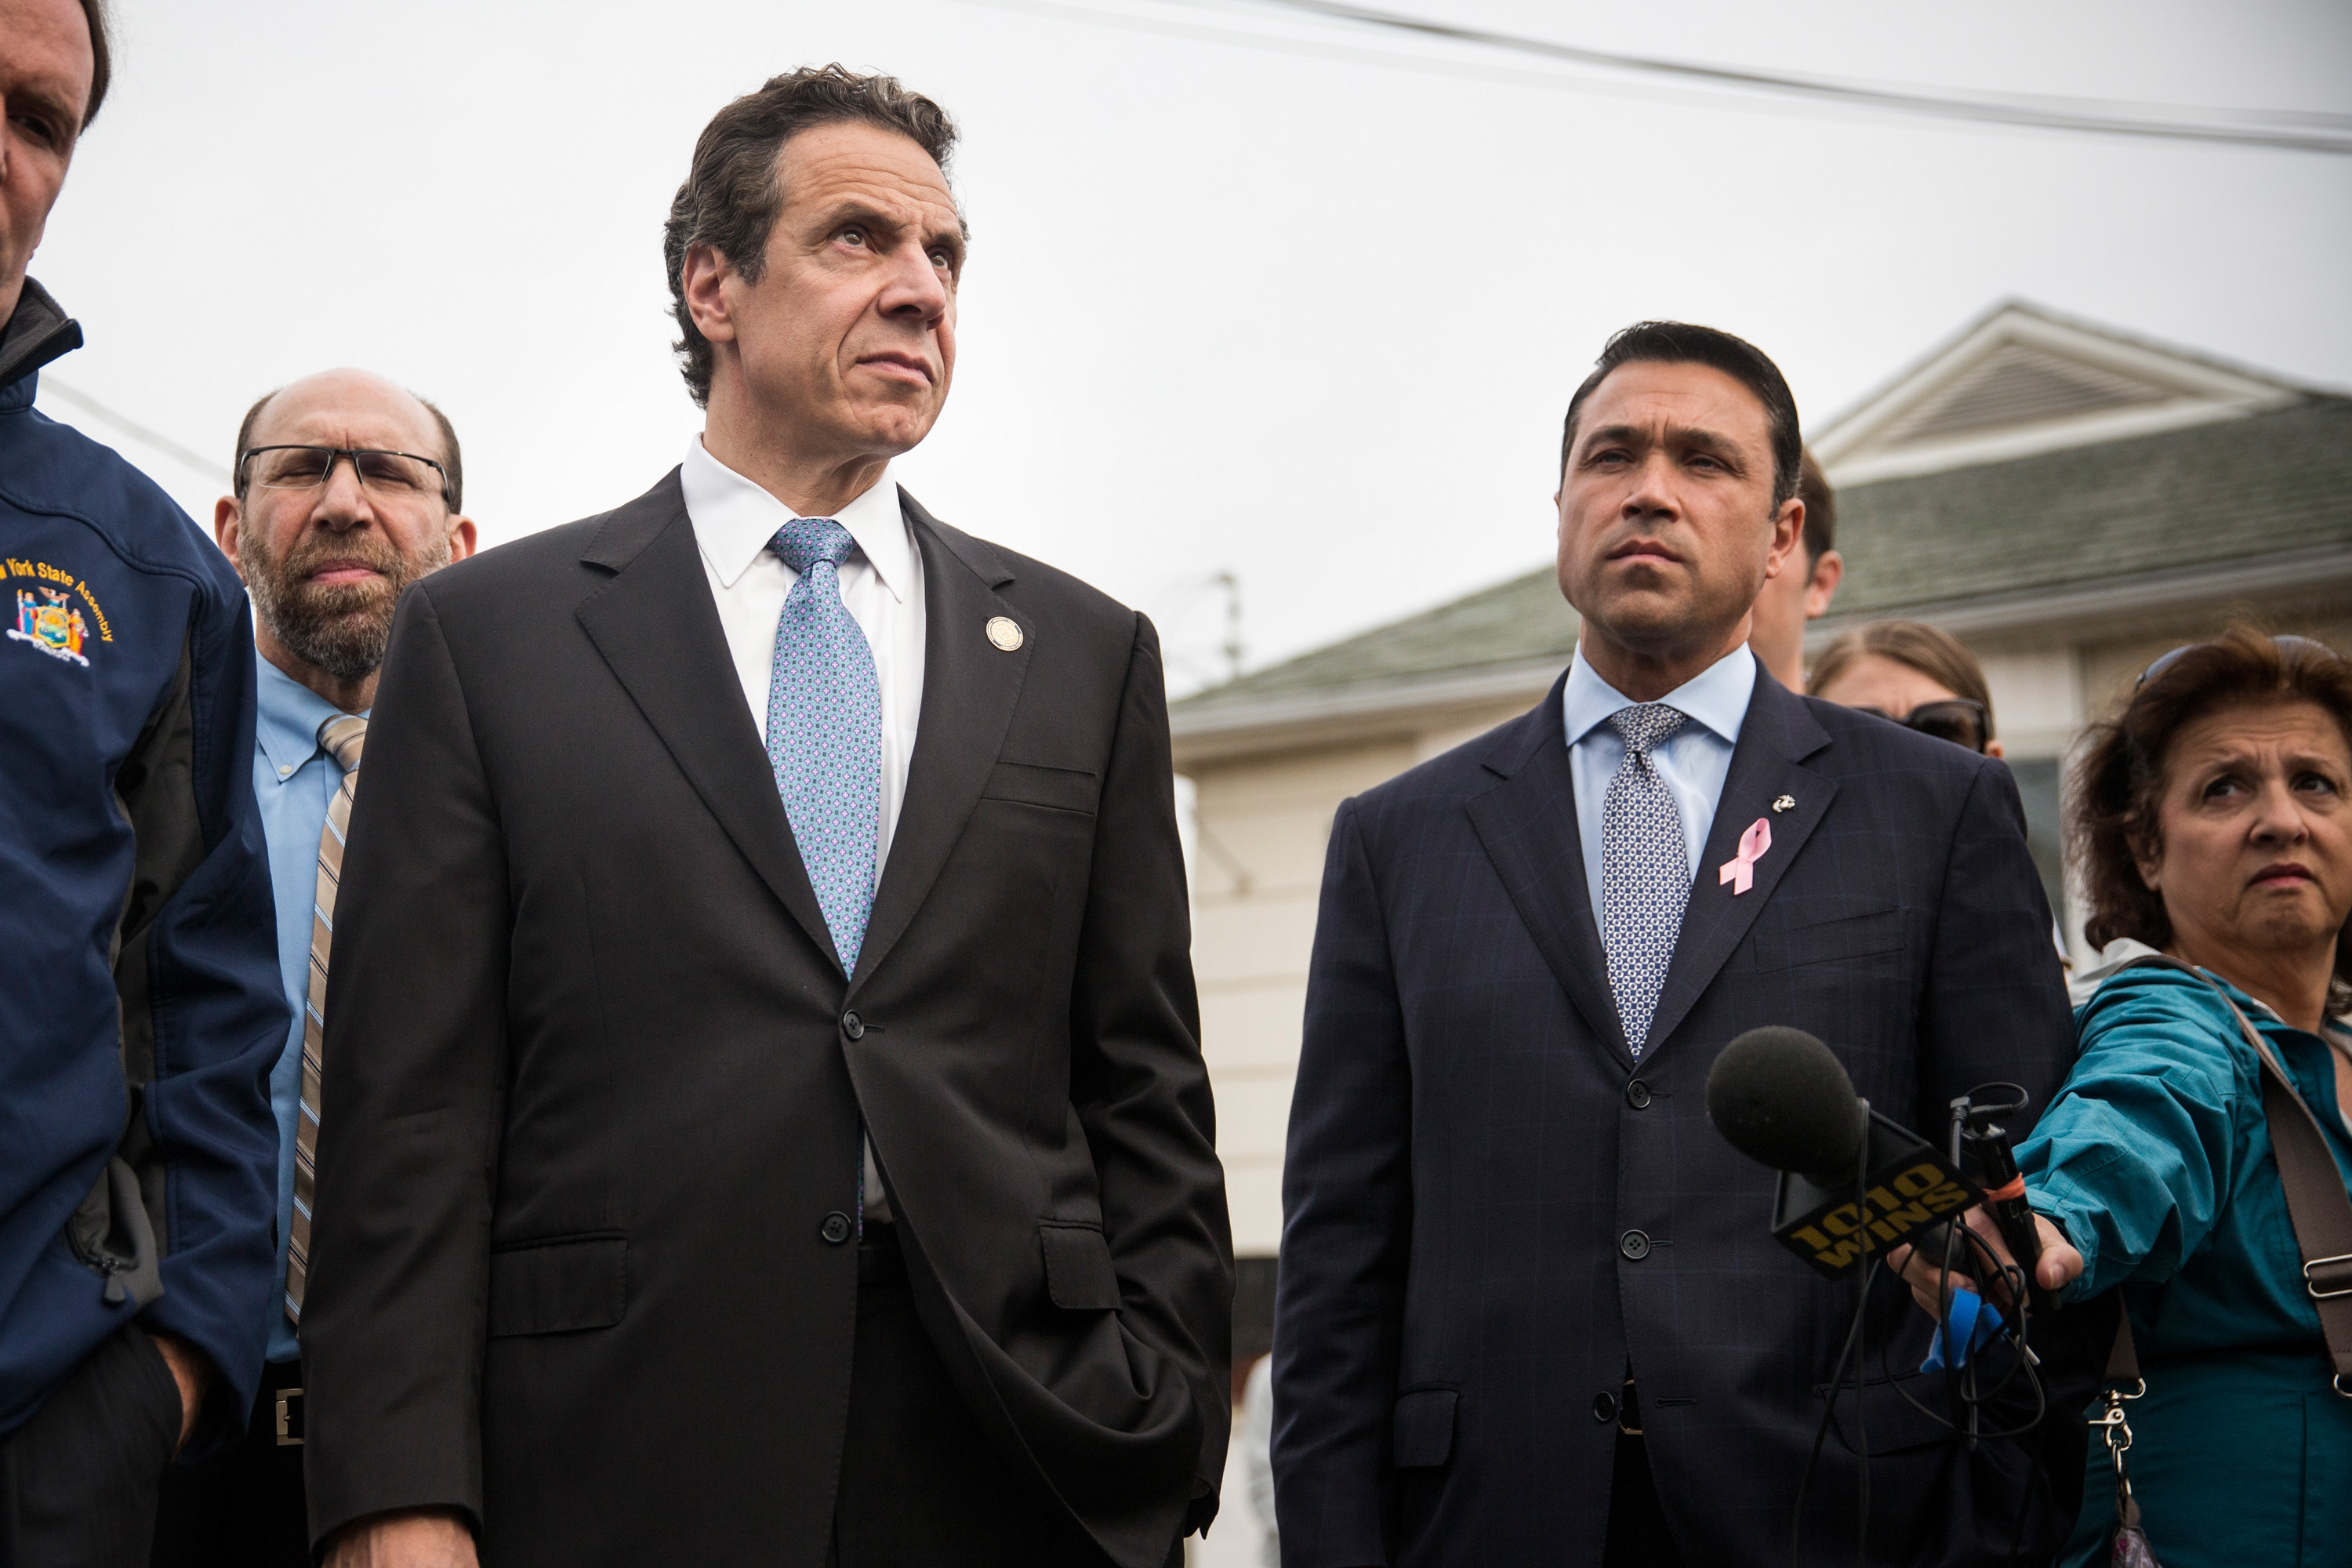 New York Governor Andrew Cuomo (L) and former New York Rep. Michael Grimm (R) NEW YORK, NY - OCTOBER 29. (Photo by Andrew Burton/Getty Images)